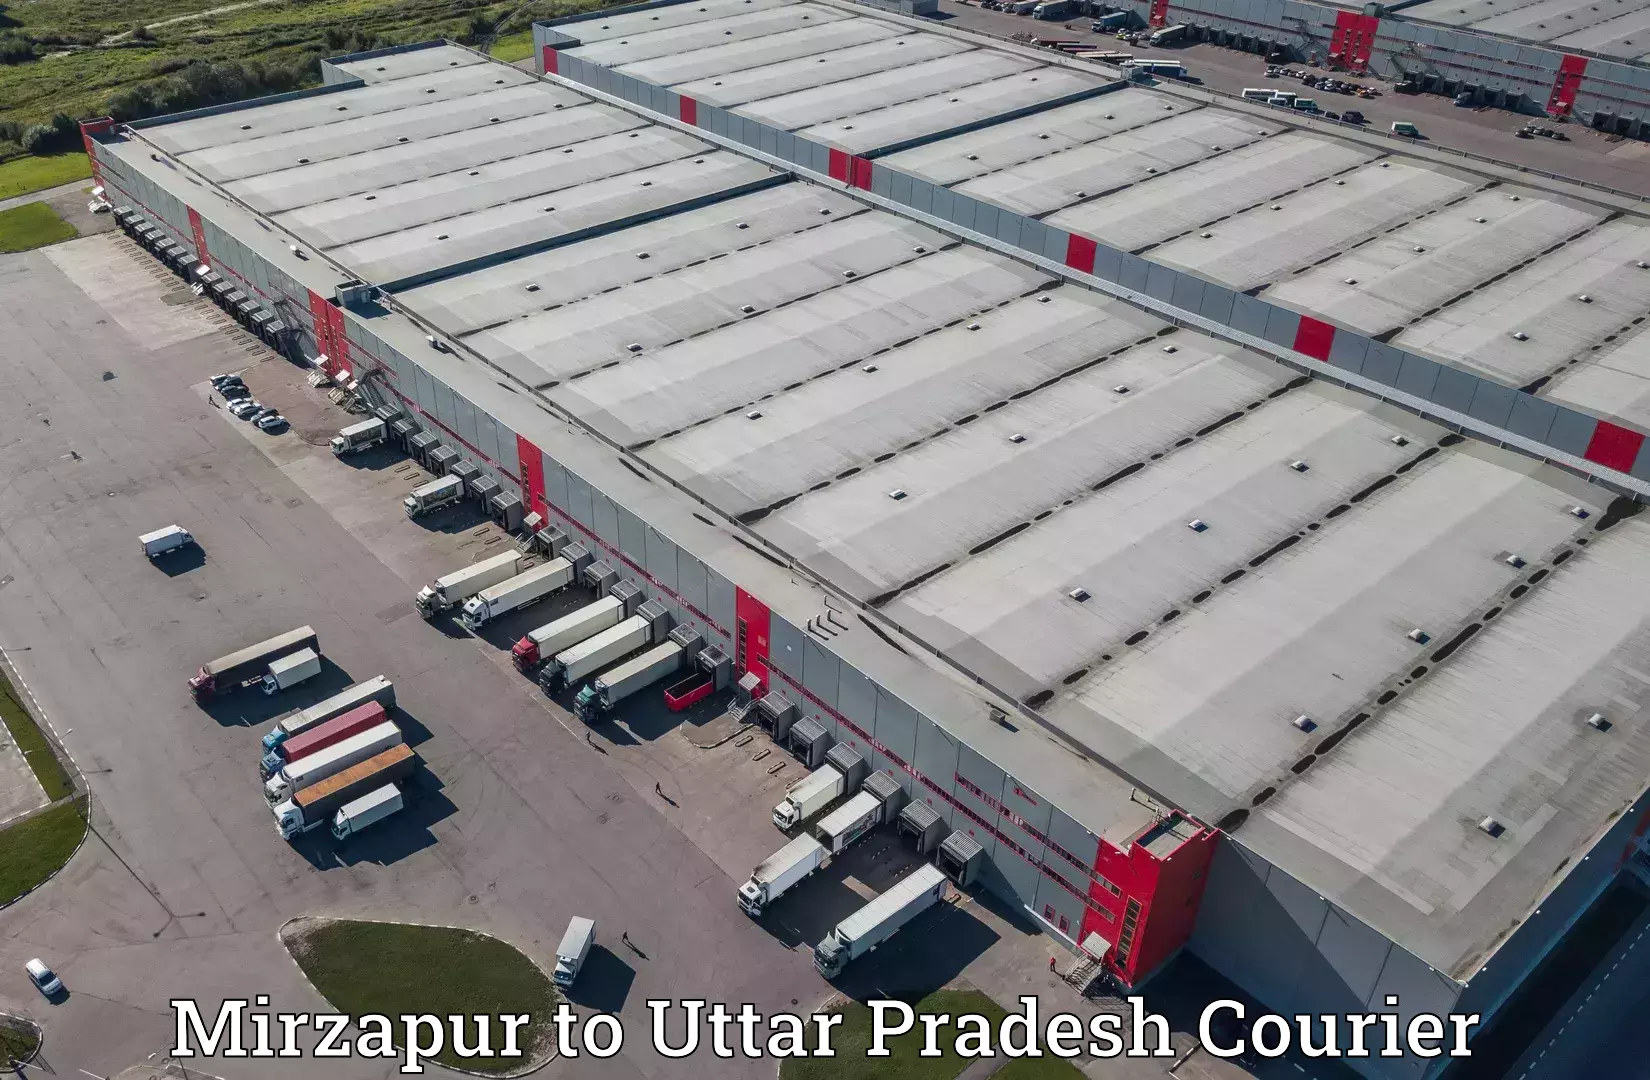 High-priority parcel service Mirzapur to Aligarh